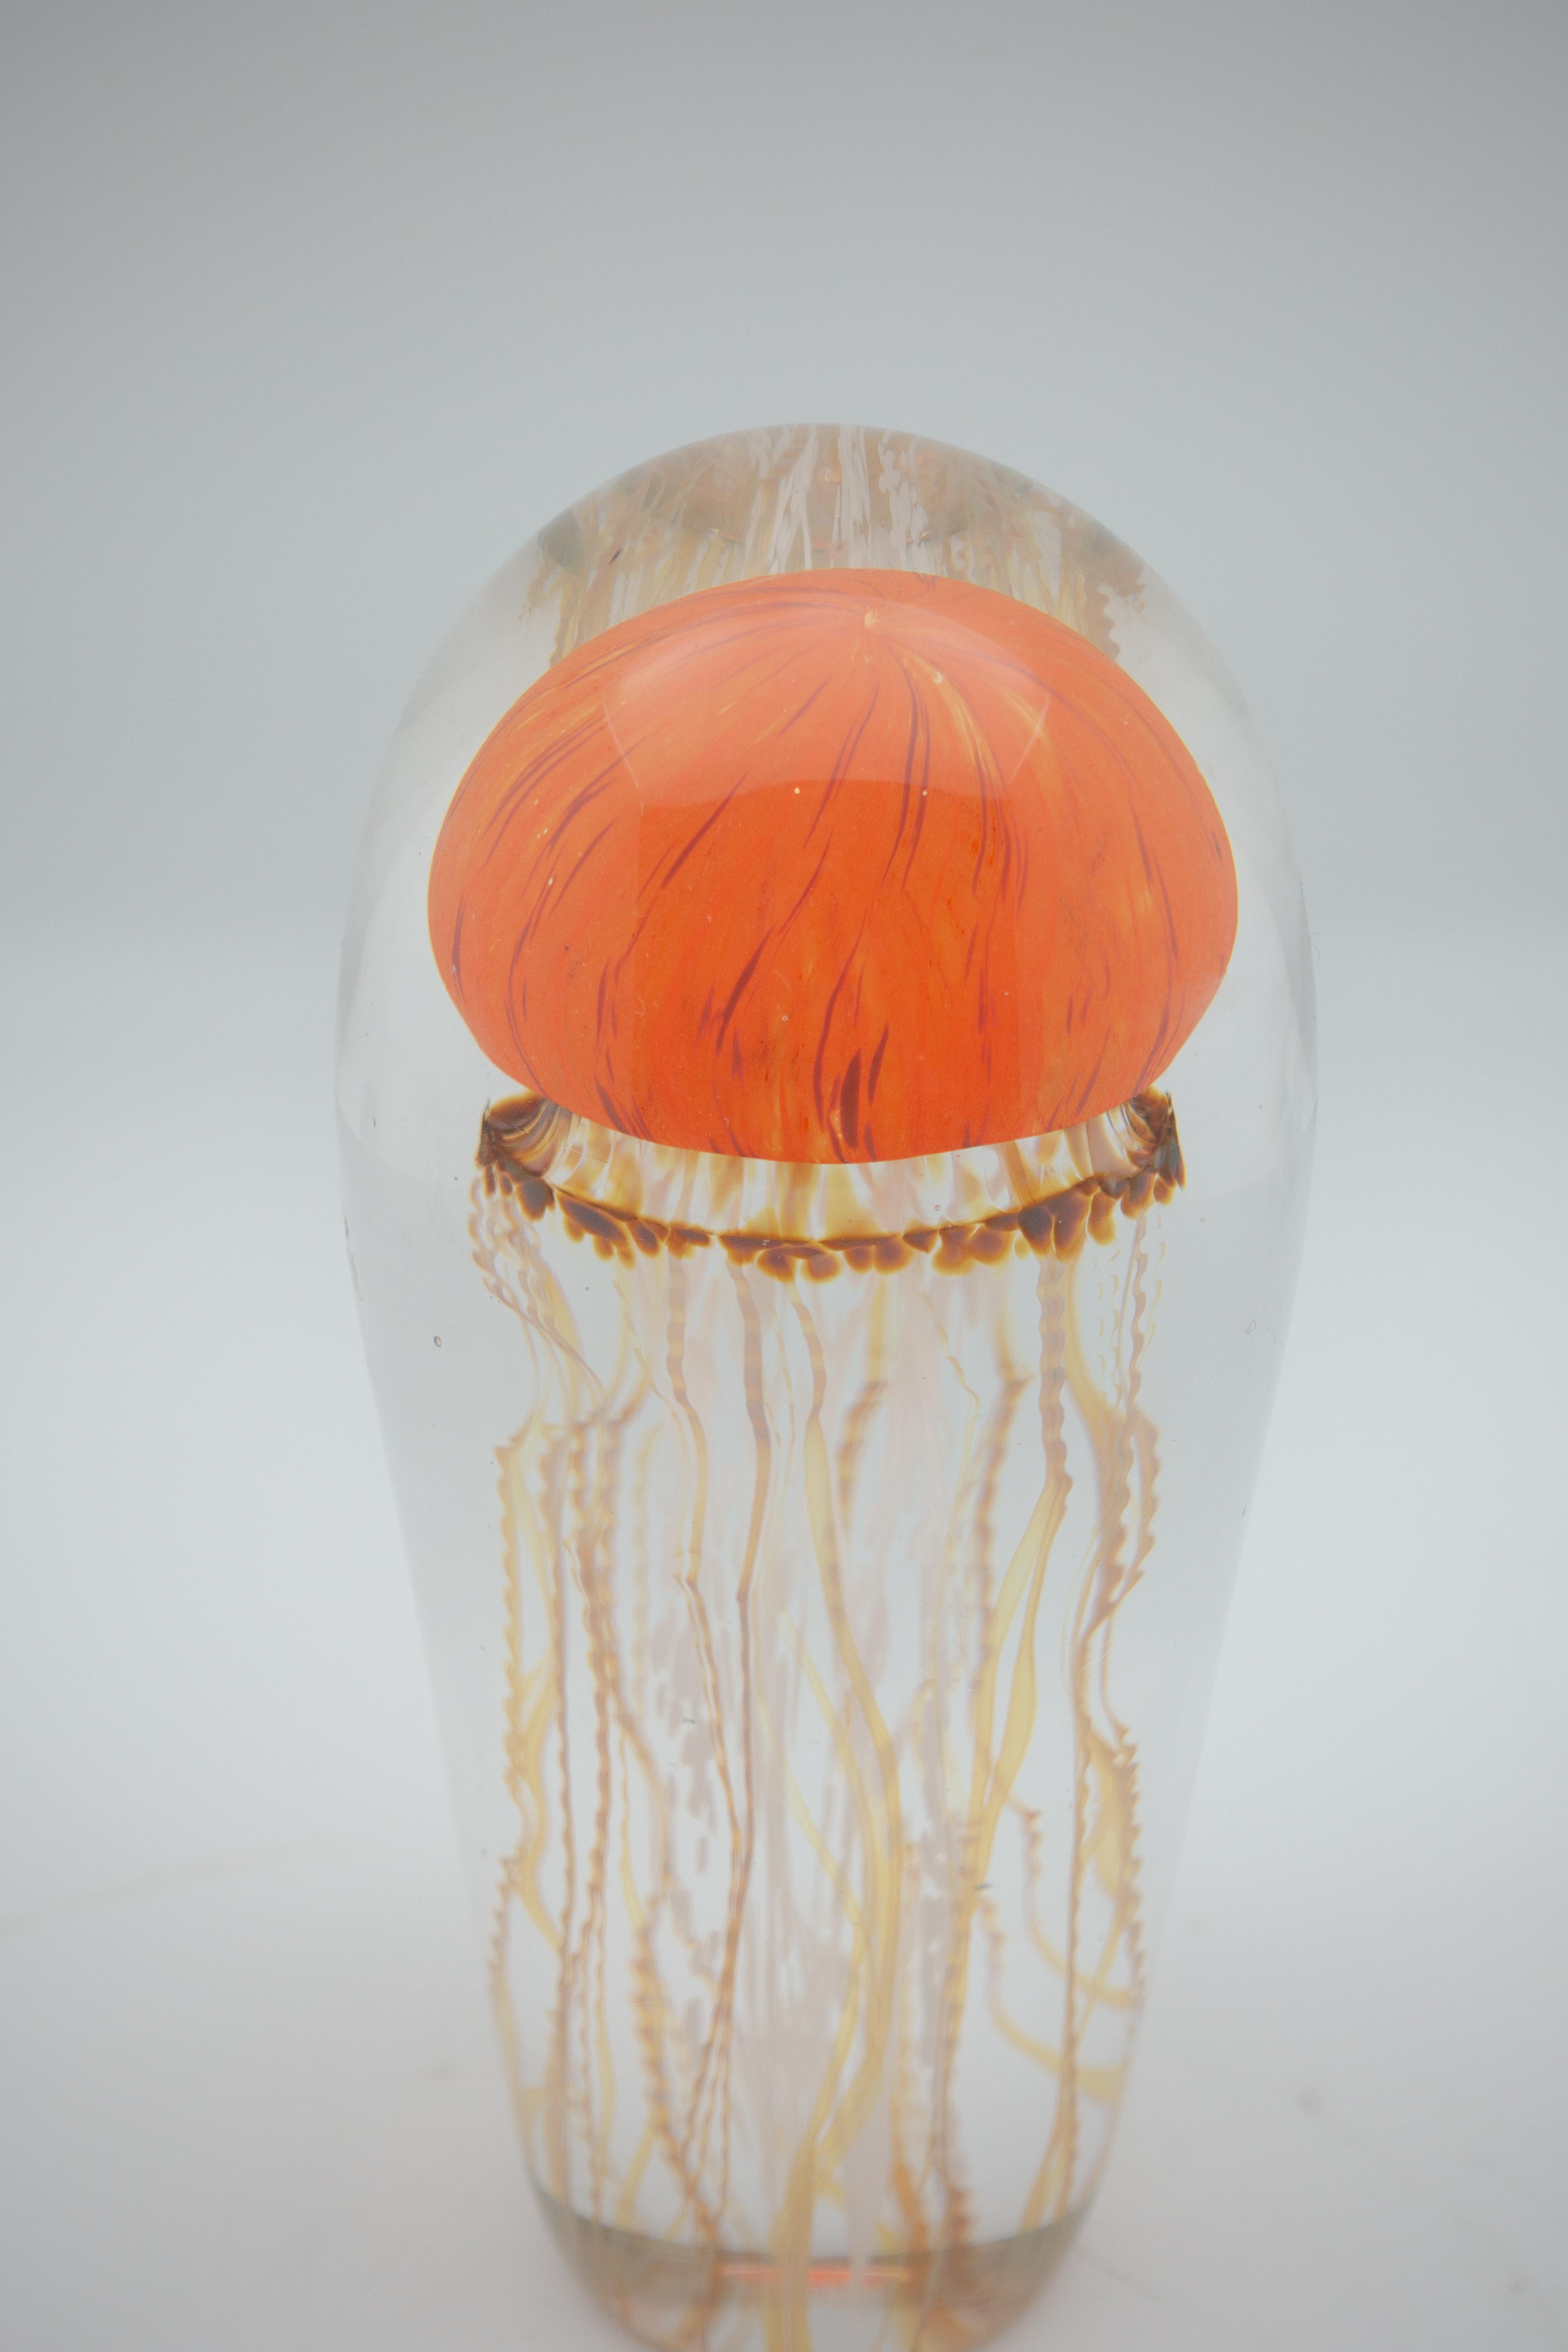 Sunrise glass jellyfish sculpture. Blown glass sculpture of jellyfish, in Sunrise, made in the USA. Other color variations available.